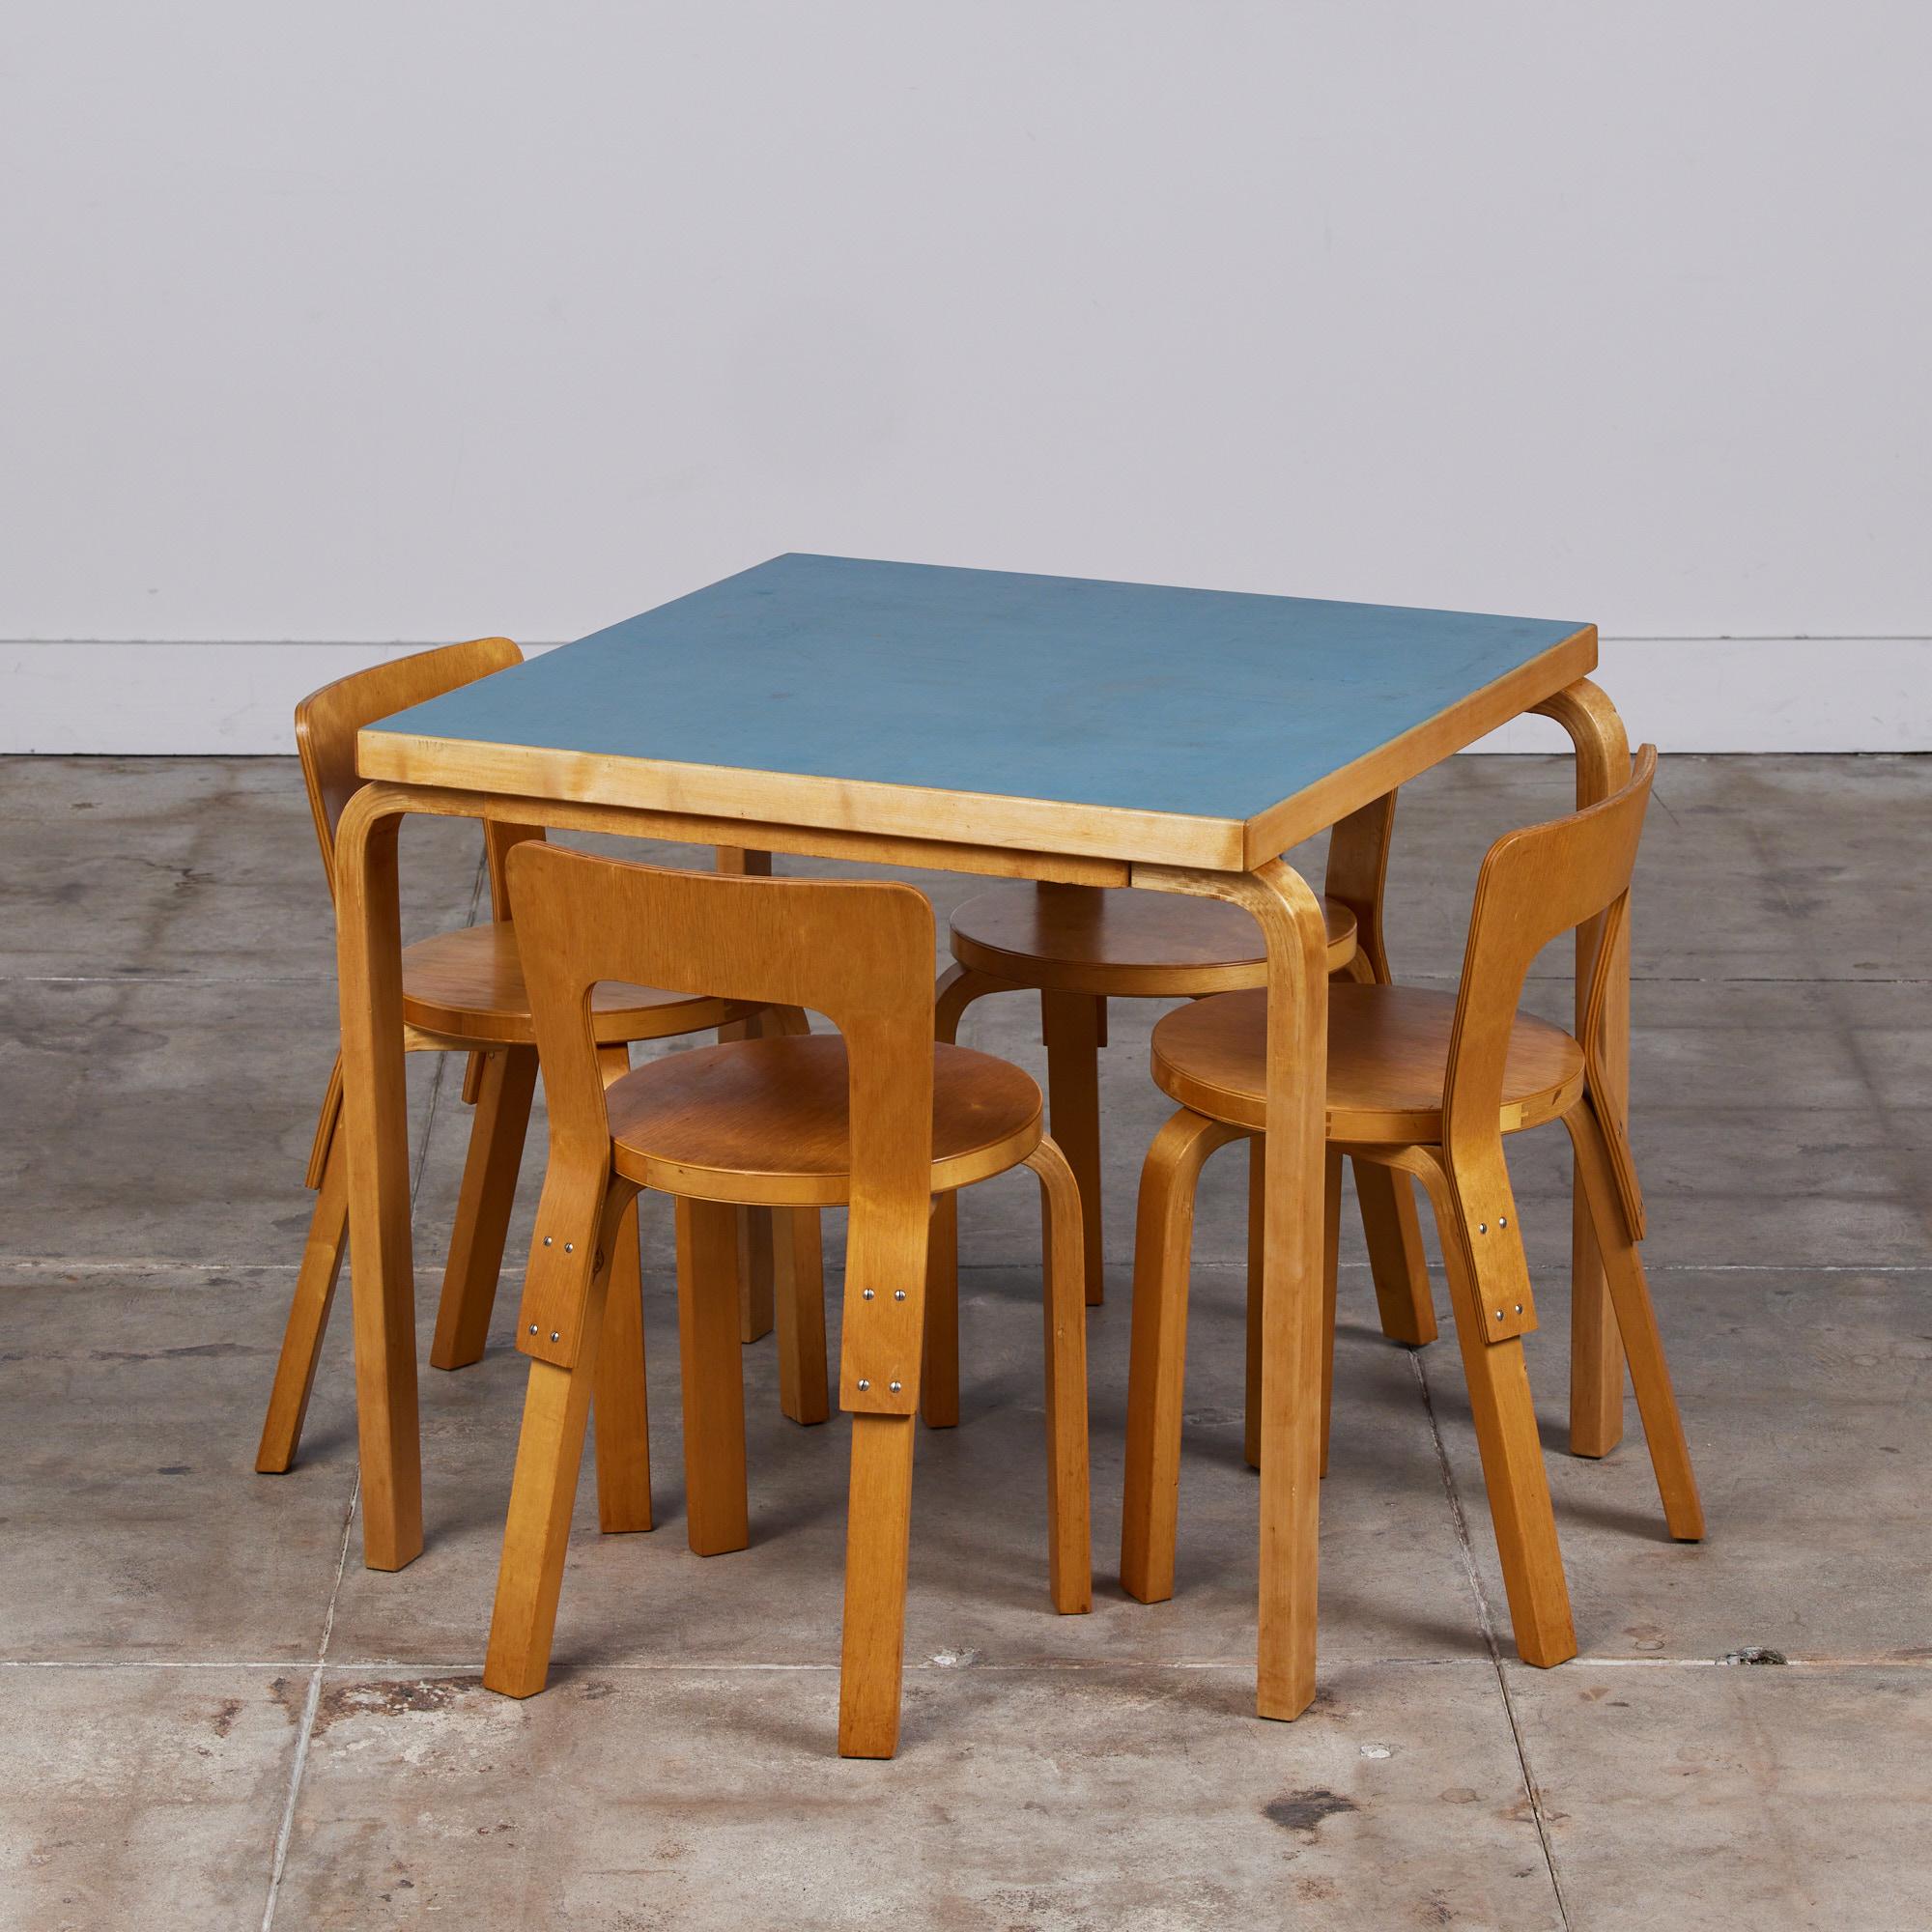 Dining set designed by Alvar Aalto, for Artek. This set features a square birch table with blue laminate top that sits atop bentwood legs and four 